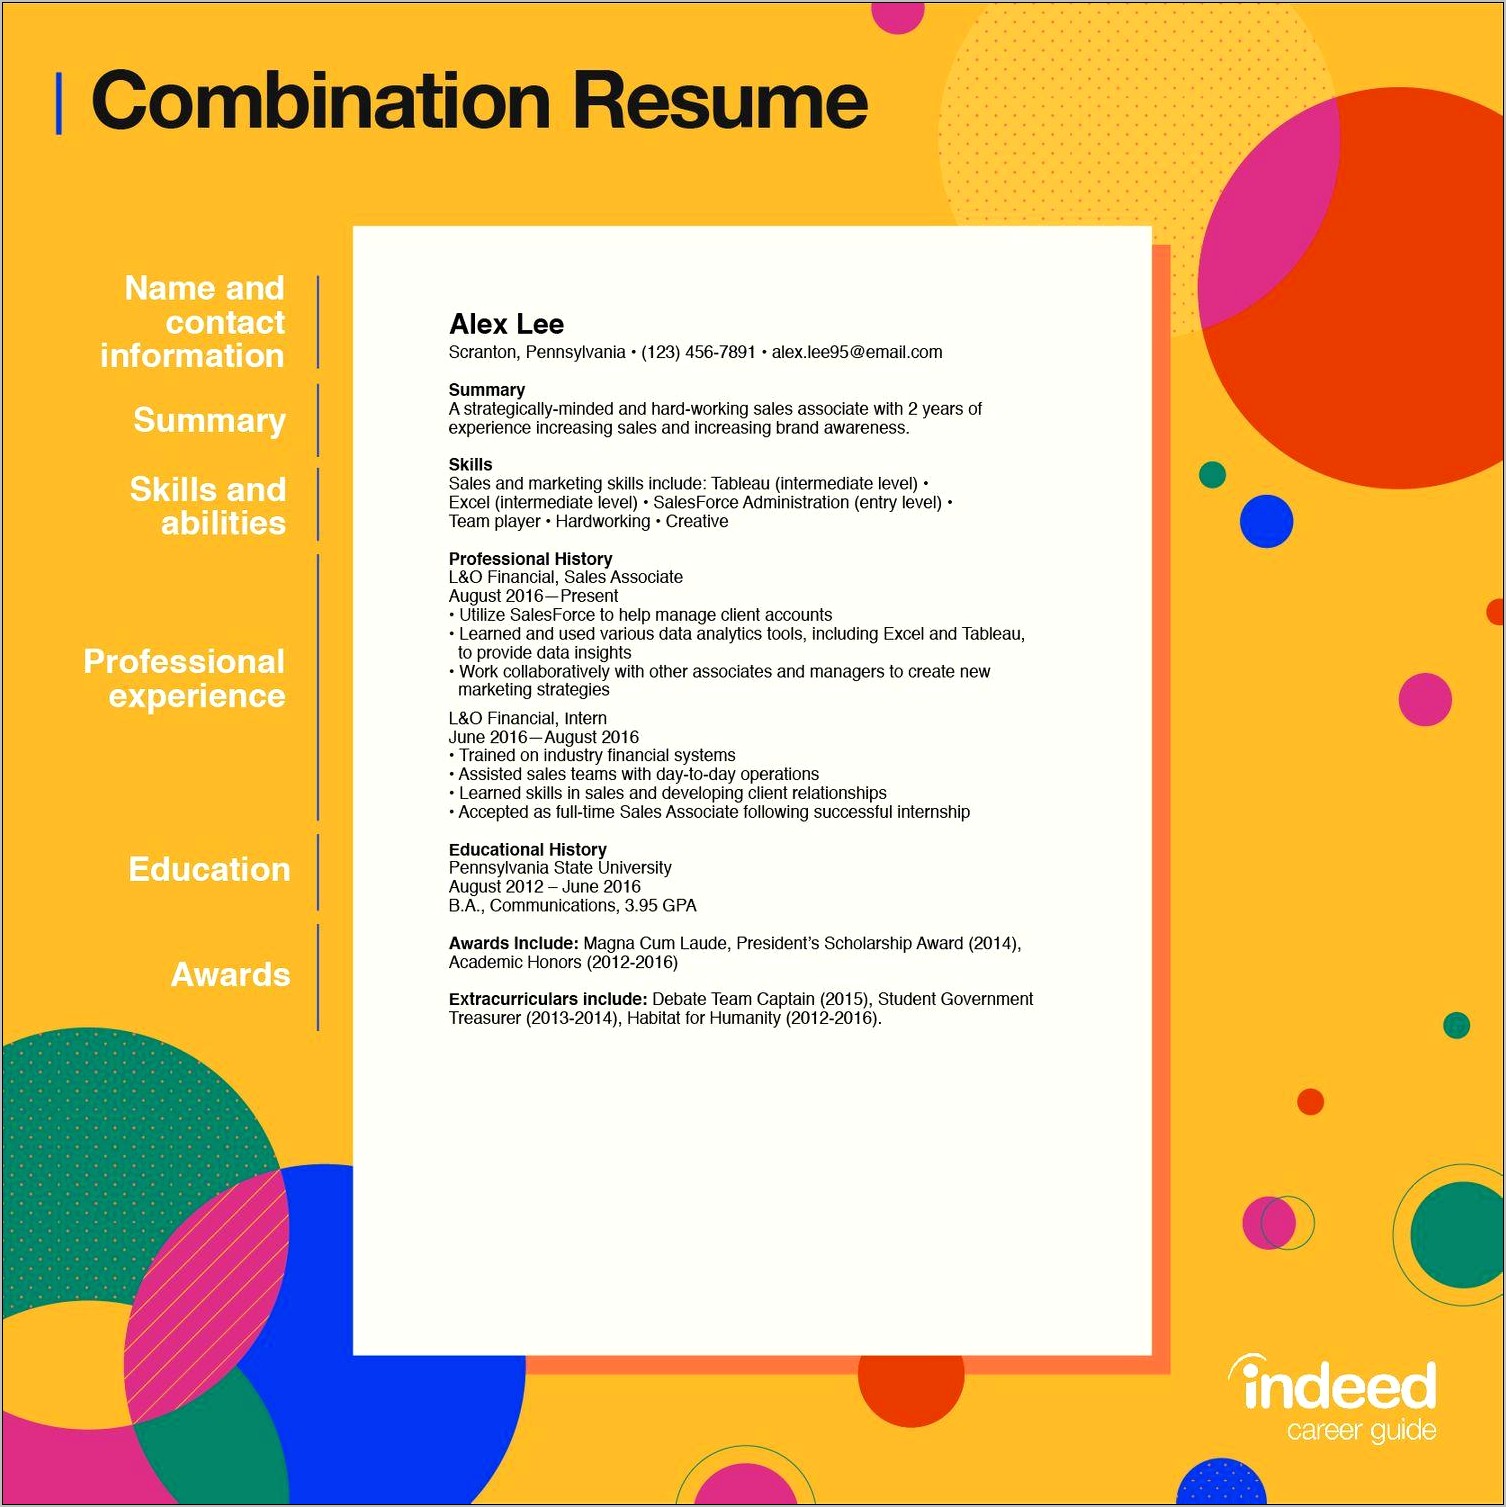 Resume Difference Between Responsibilities And Skills